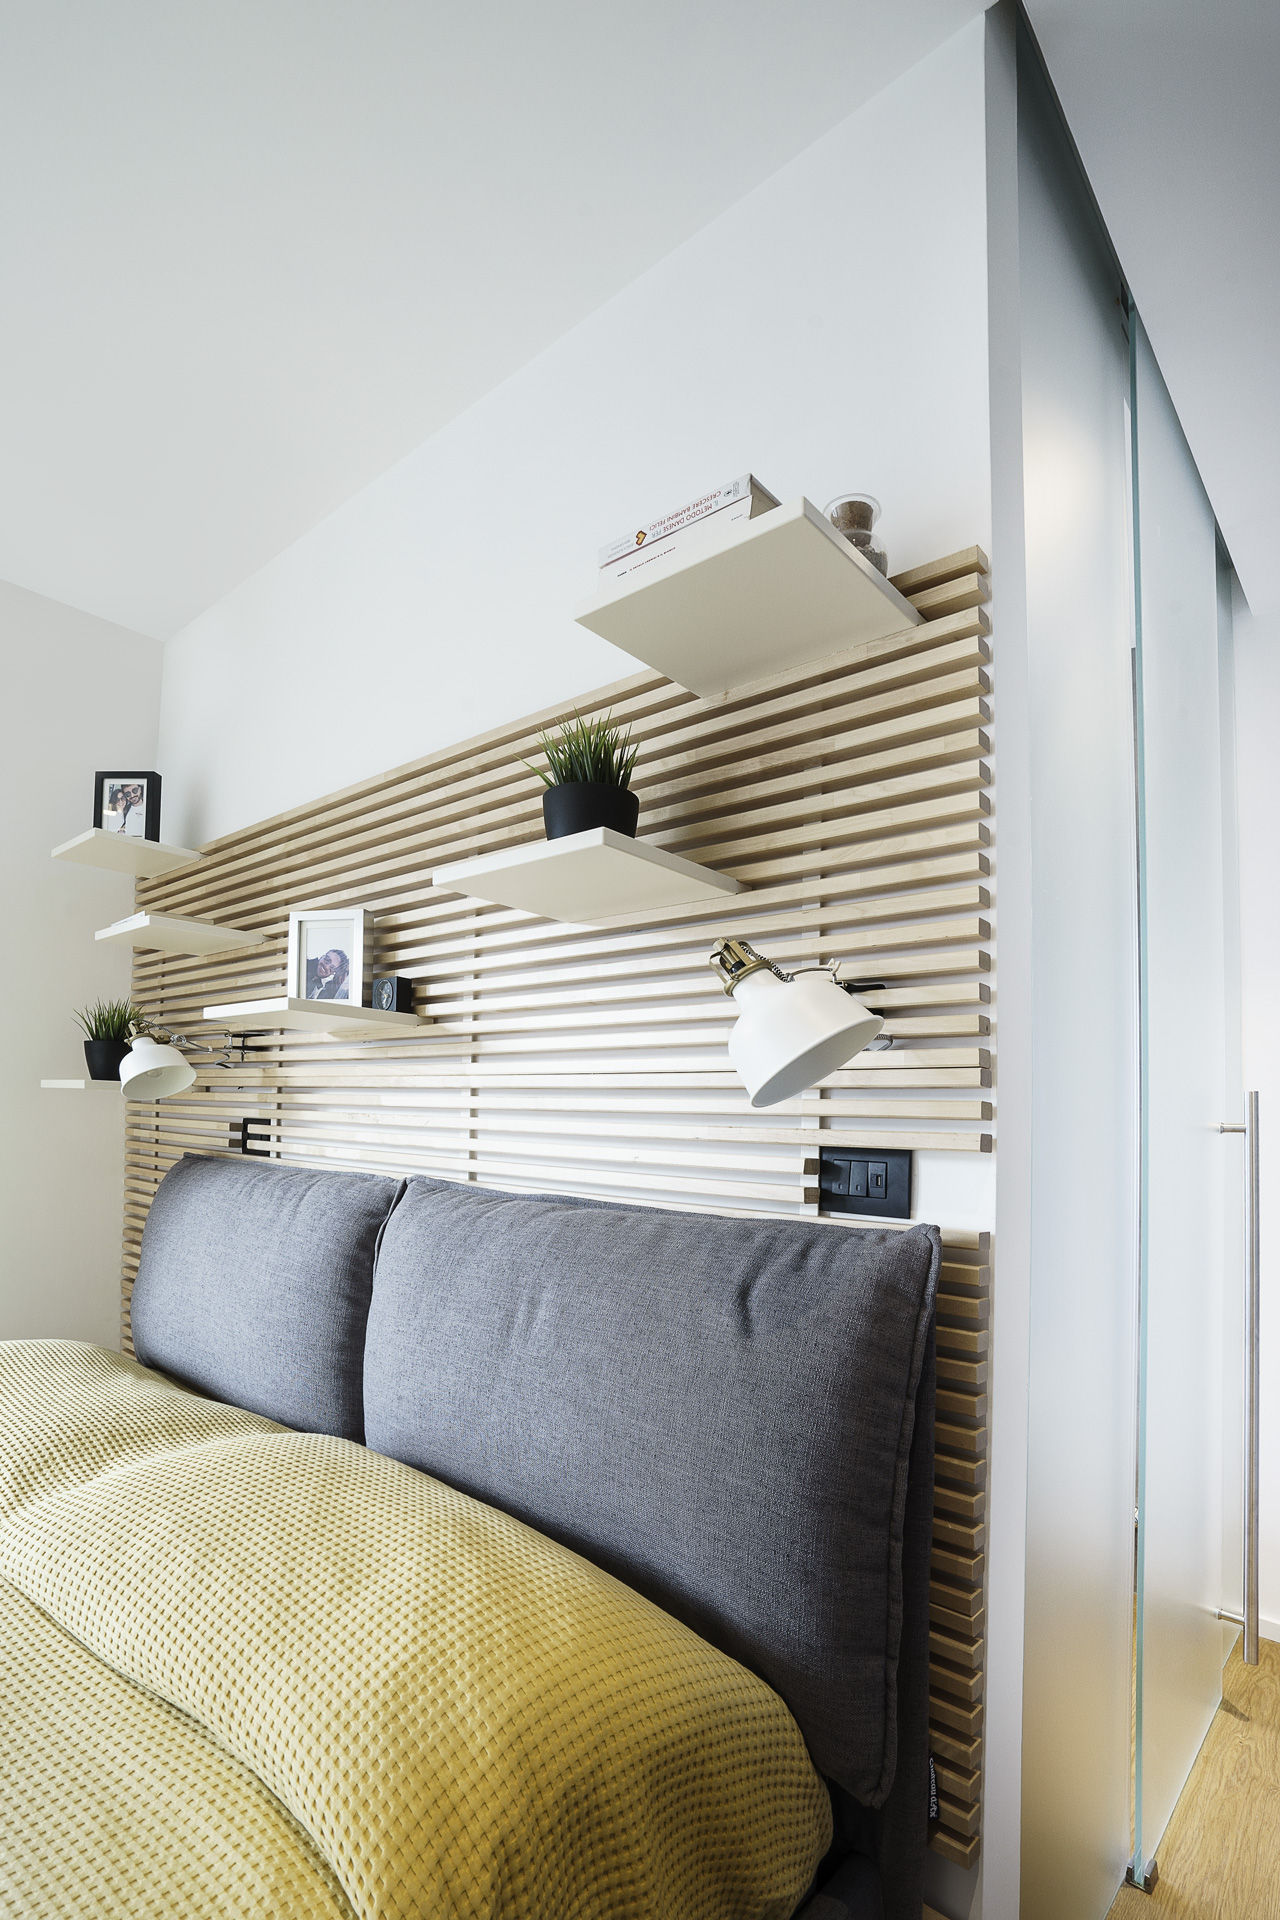 Grid Apartment by Brain Factory